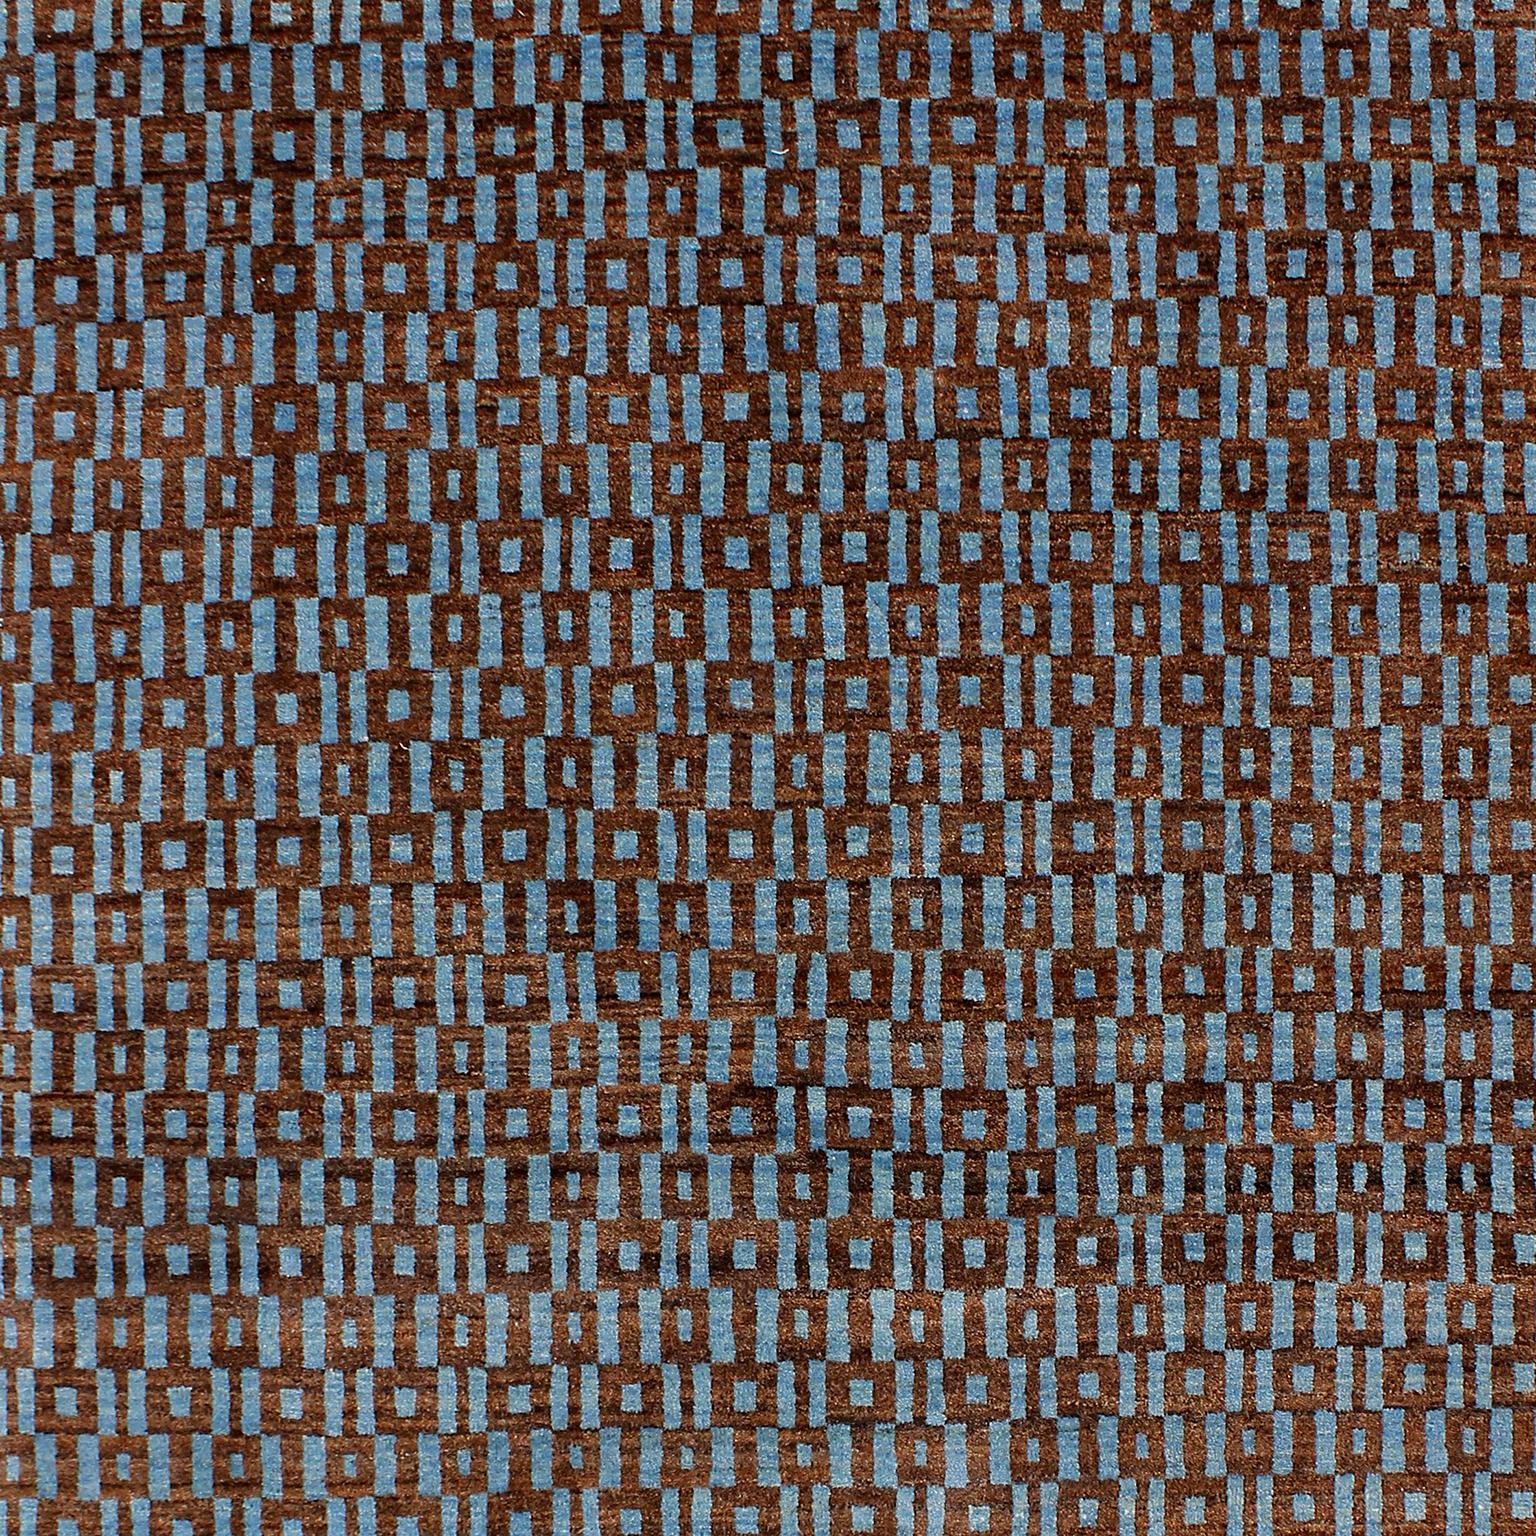 This Orley Shabahang signature “Windows” carpet in pure handspun wool and organic dyes showcases an Architectural Modern design in a hand knotted Persian weave. In a blue and brown colorway, this geometric design draws its inspiration from a